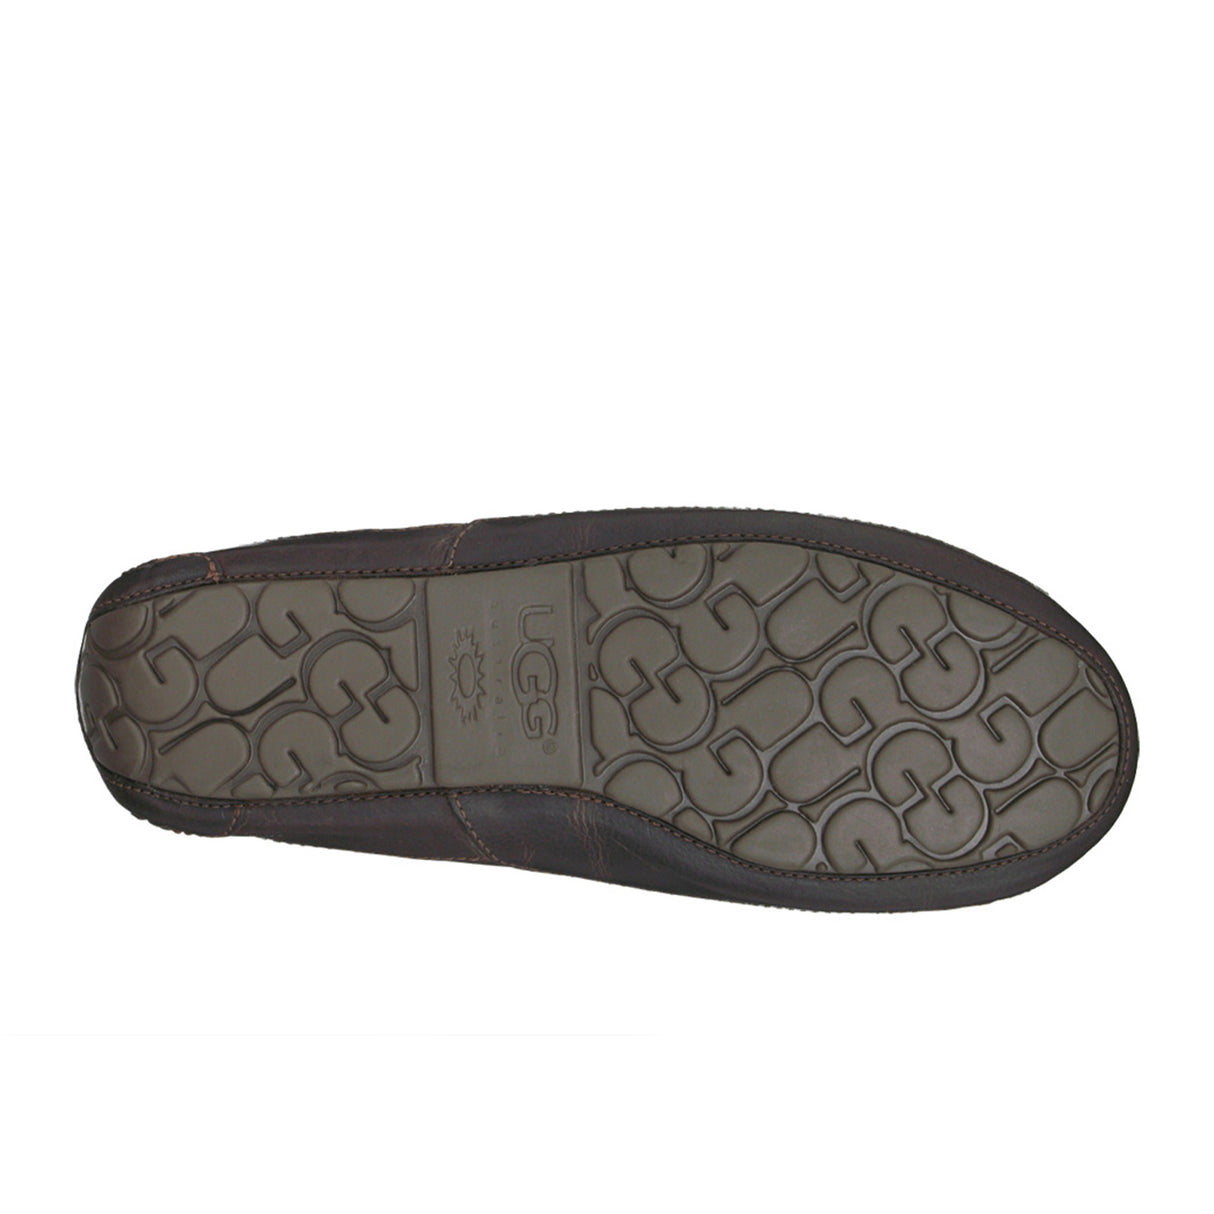 UGG® Ascot Leather Slipper (Men) - Dark Spice Dress-Casual - Slippers - The Heel Shoe Fitters